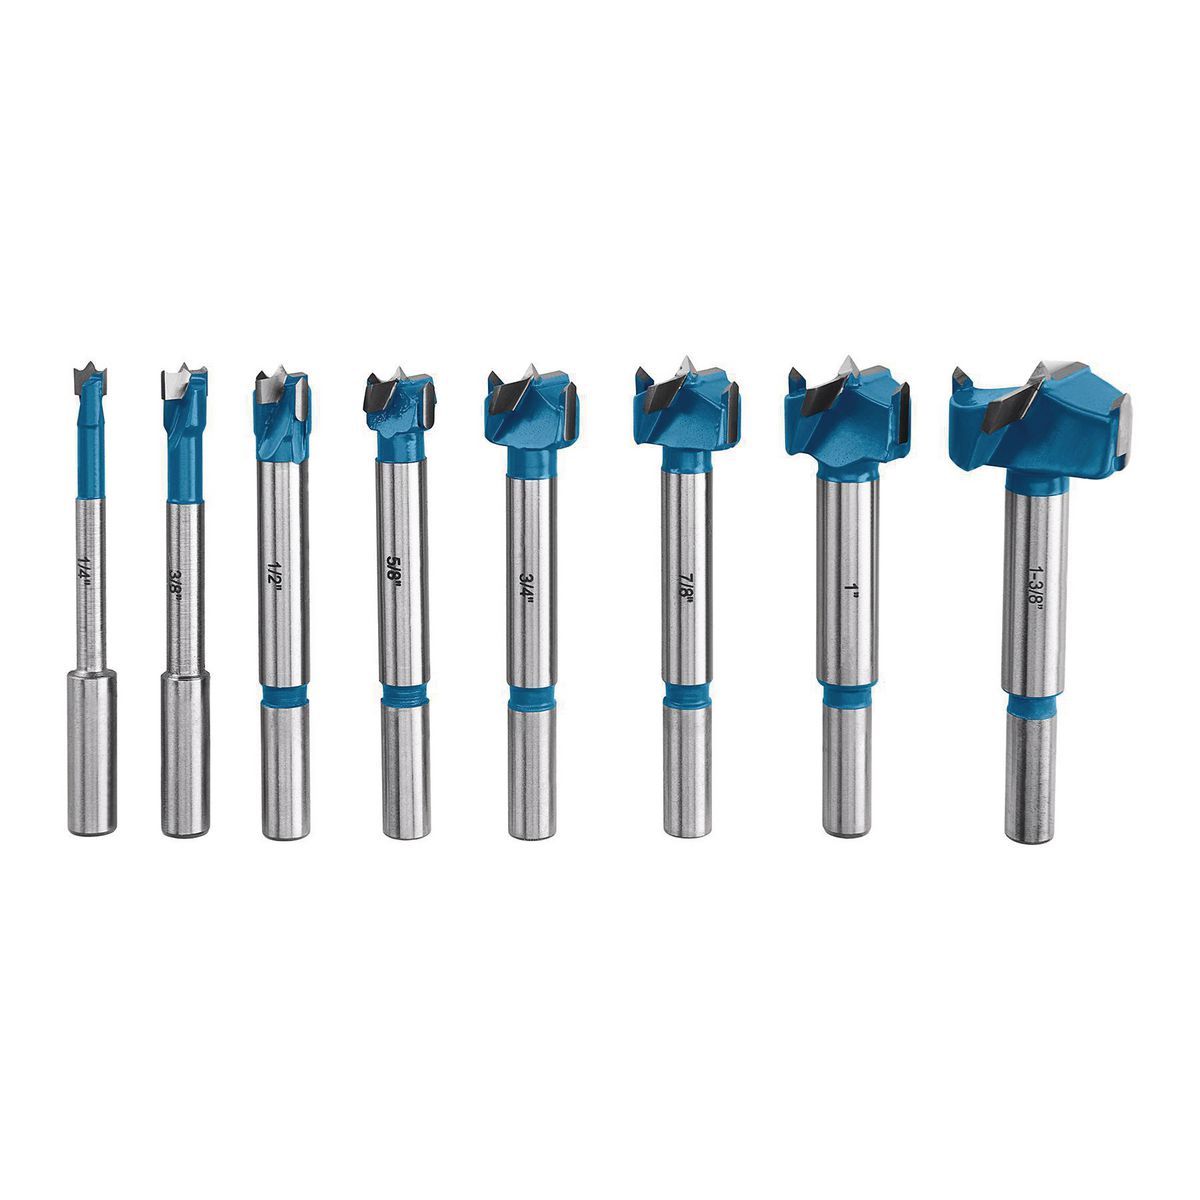 HERCULES 1/4 in. - 1-3/8 in. Carbide Tipped Forstner Drill Bit Set with 3/8 In. Shanks, 8 Piece